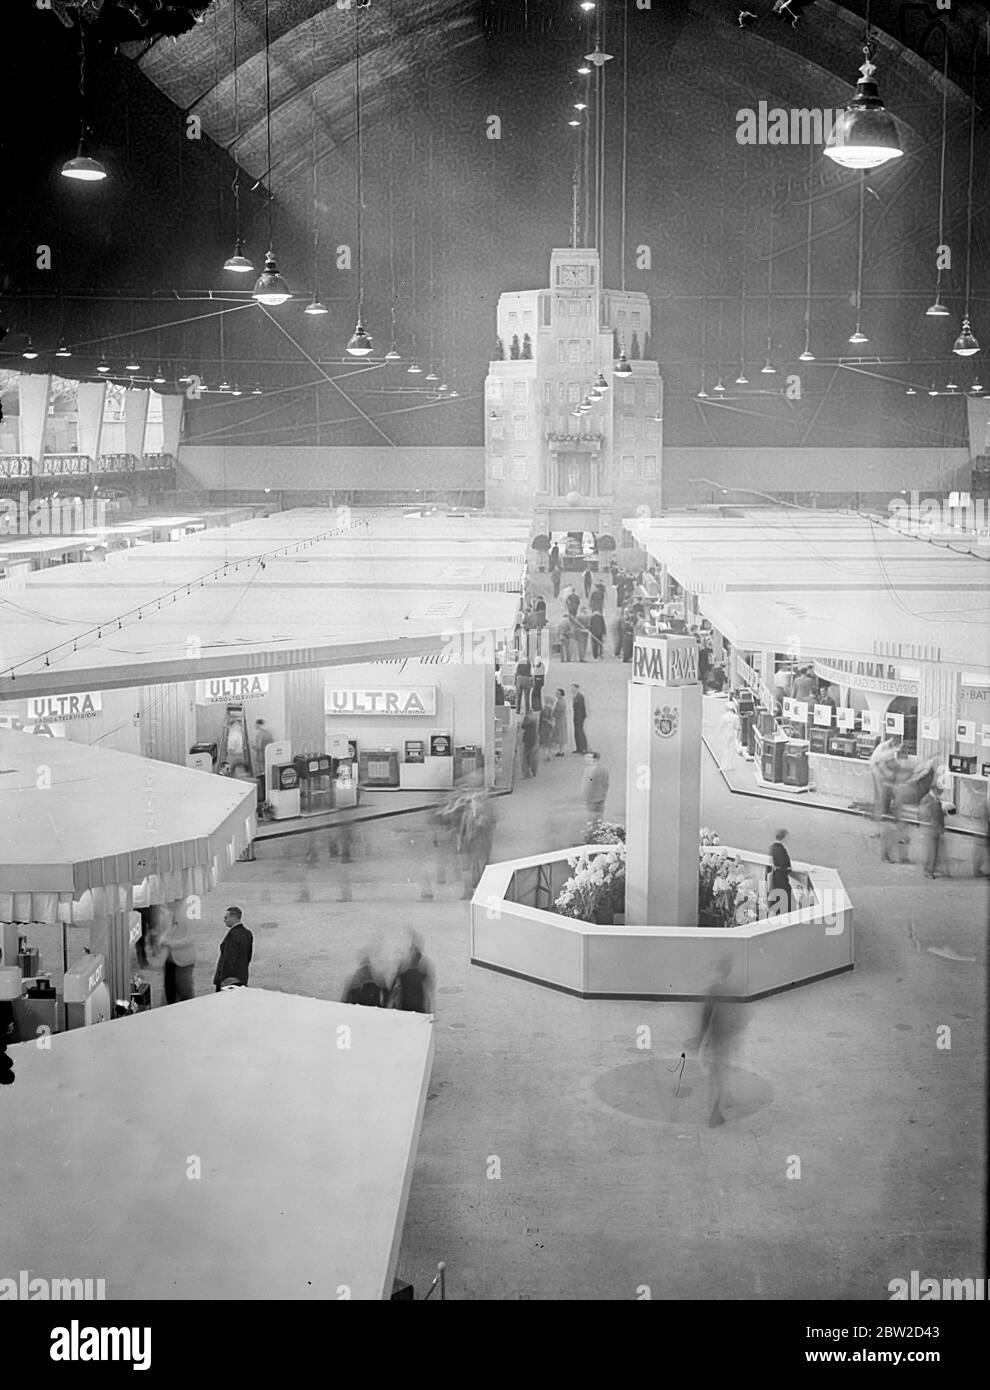 Radiolympia, Britain's biggest ever radio show, was opened at Olympia, London, for the first time by television. The first opening speech ever made to a public exhibition by television was delivered by Sir Stephen Tallents, BBC Public Relations chief, from Alexandra Palace. A general view of the show with a representation of Broadcasting House in background. 22 August 1939 Stock Photo